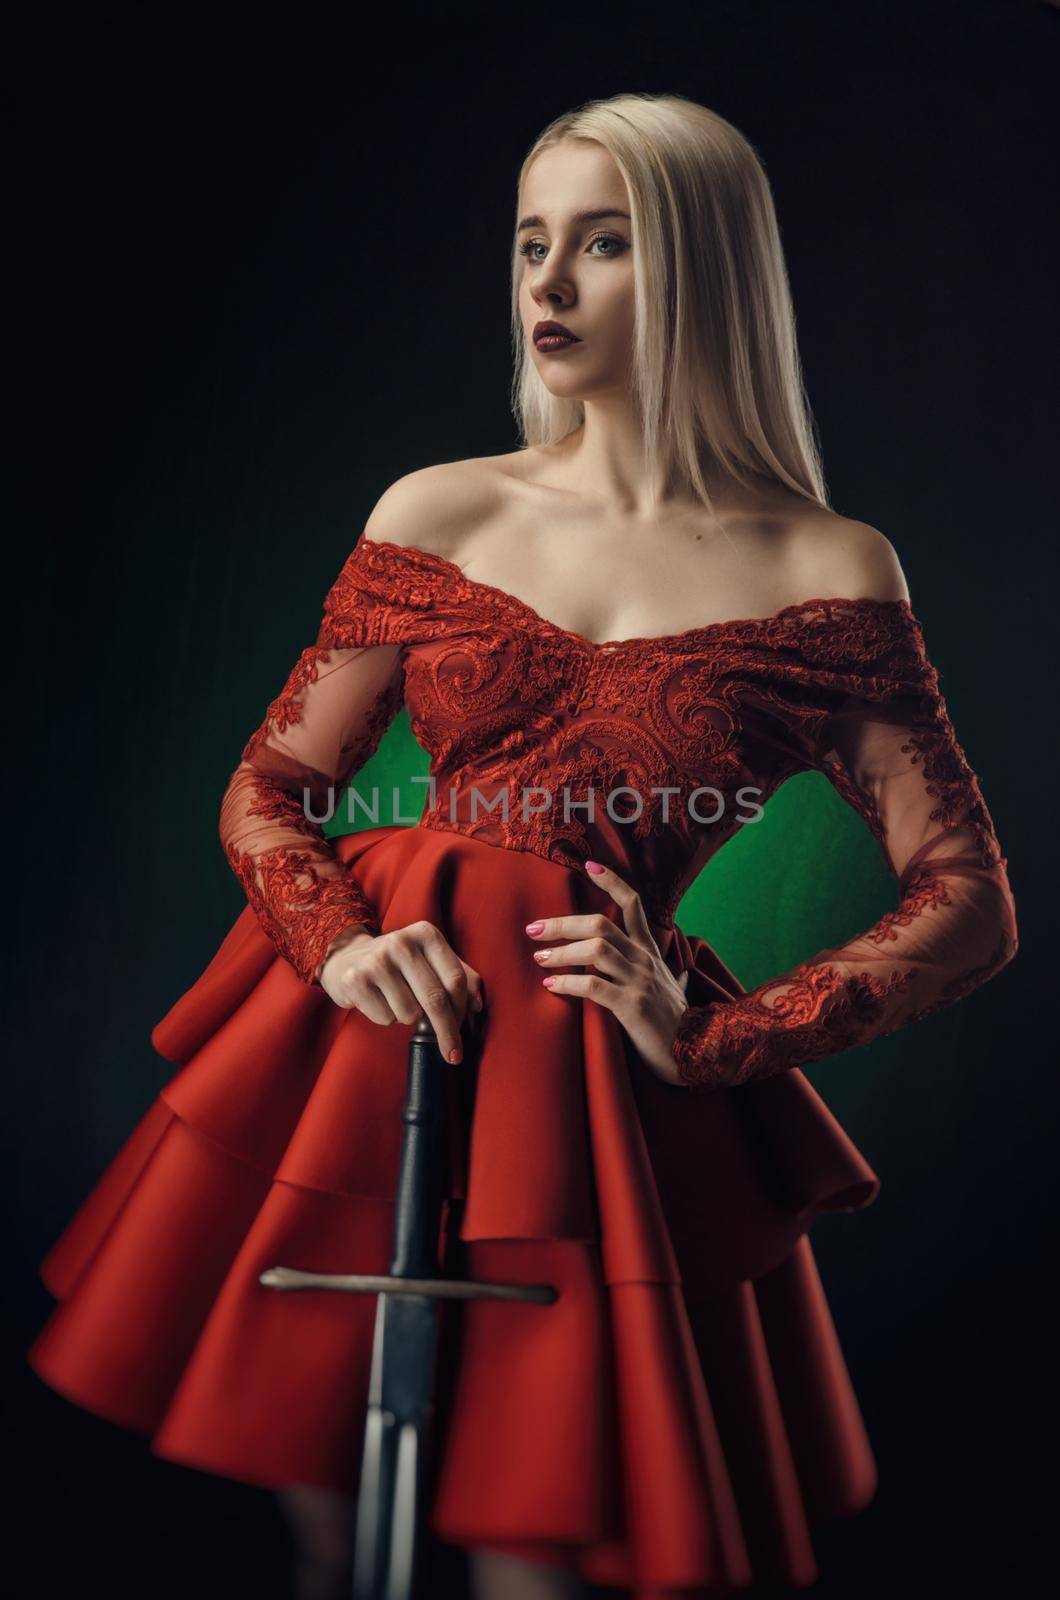 lovely girl in red dress with sword posing on black background in Studio (blonde )